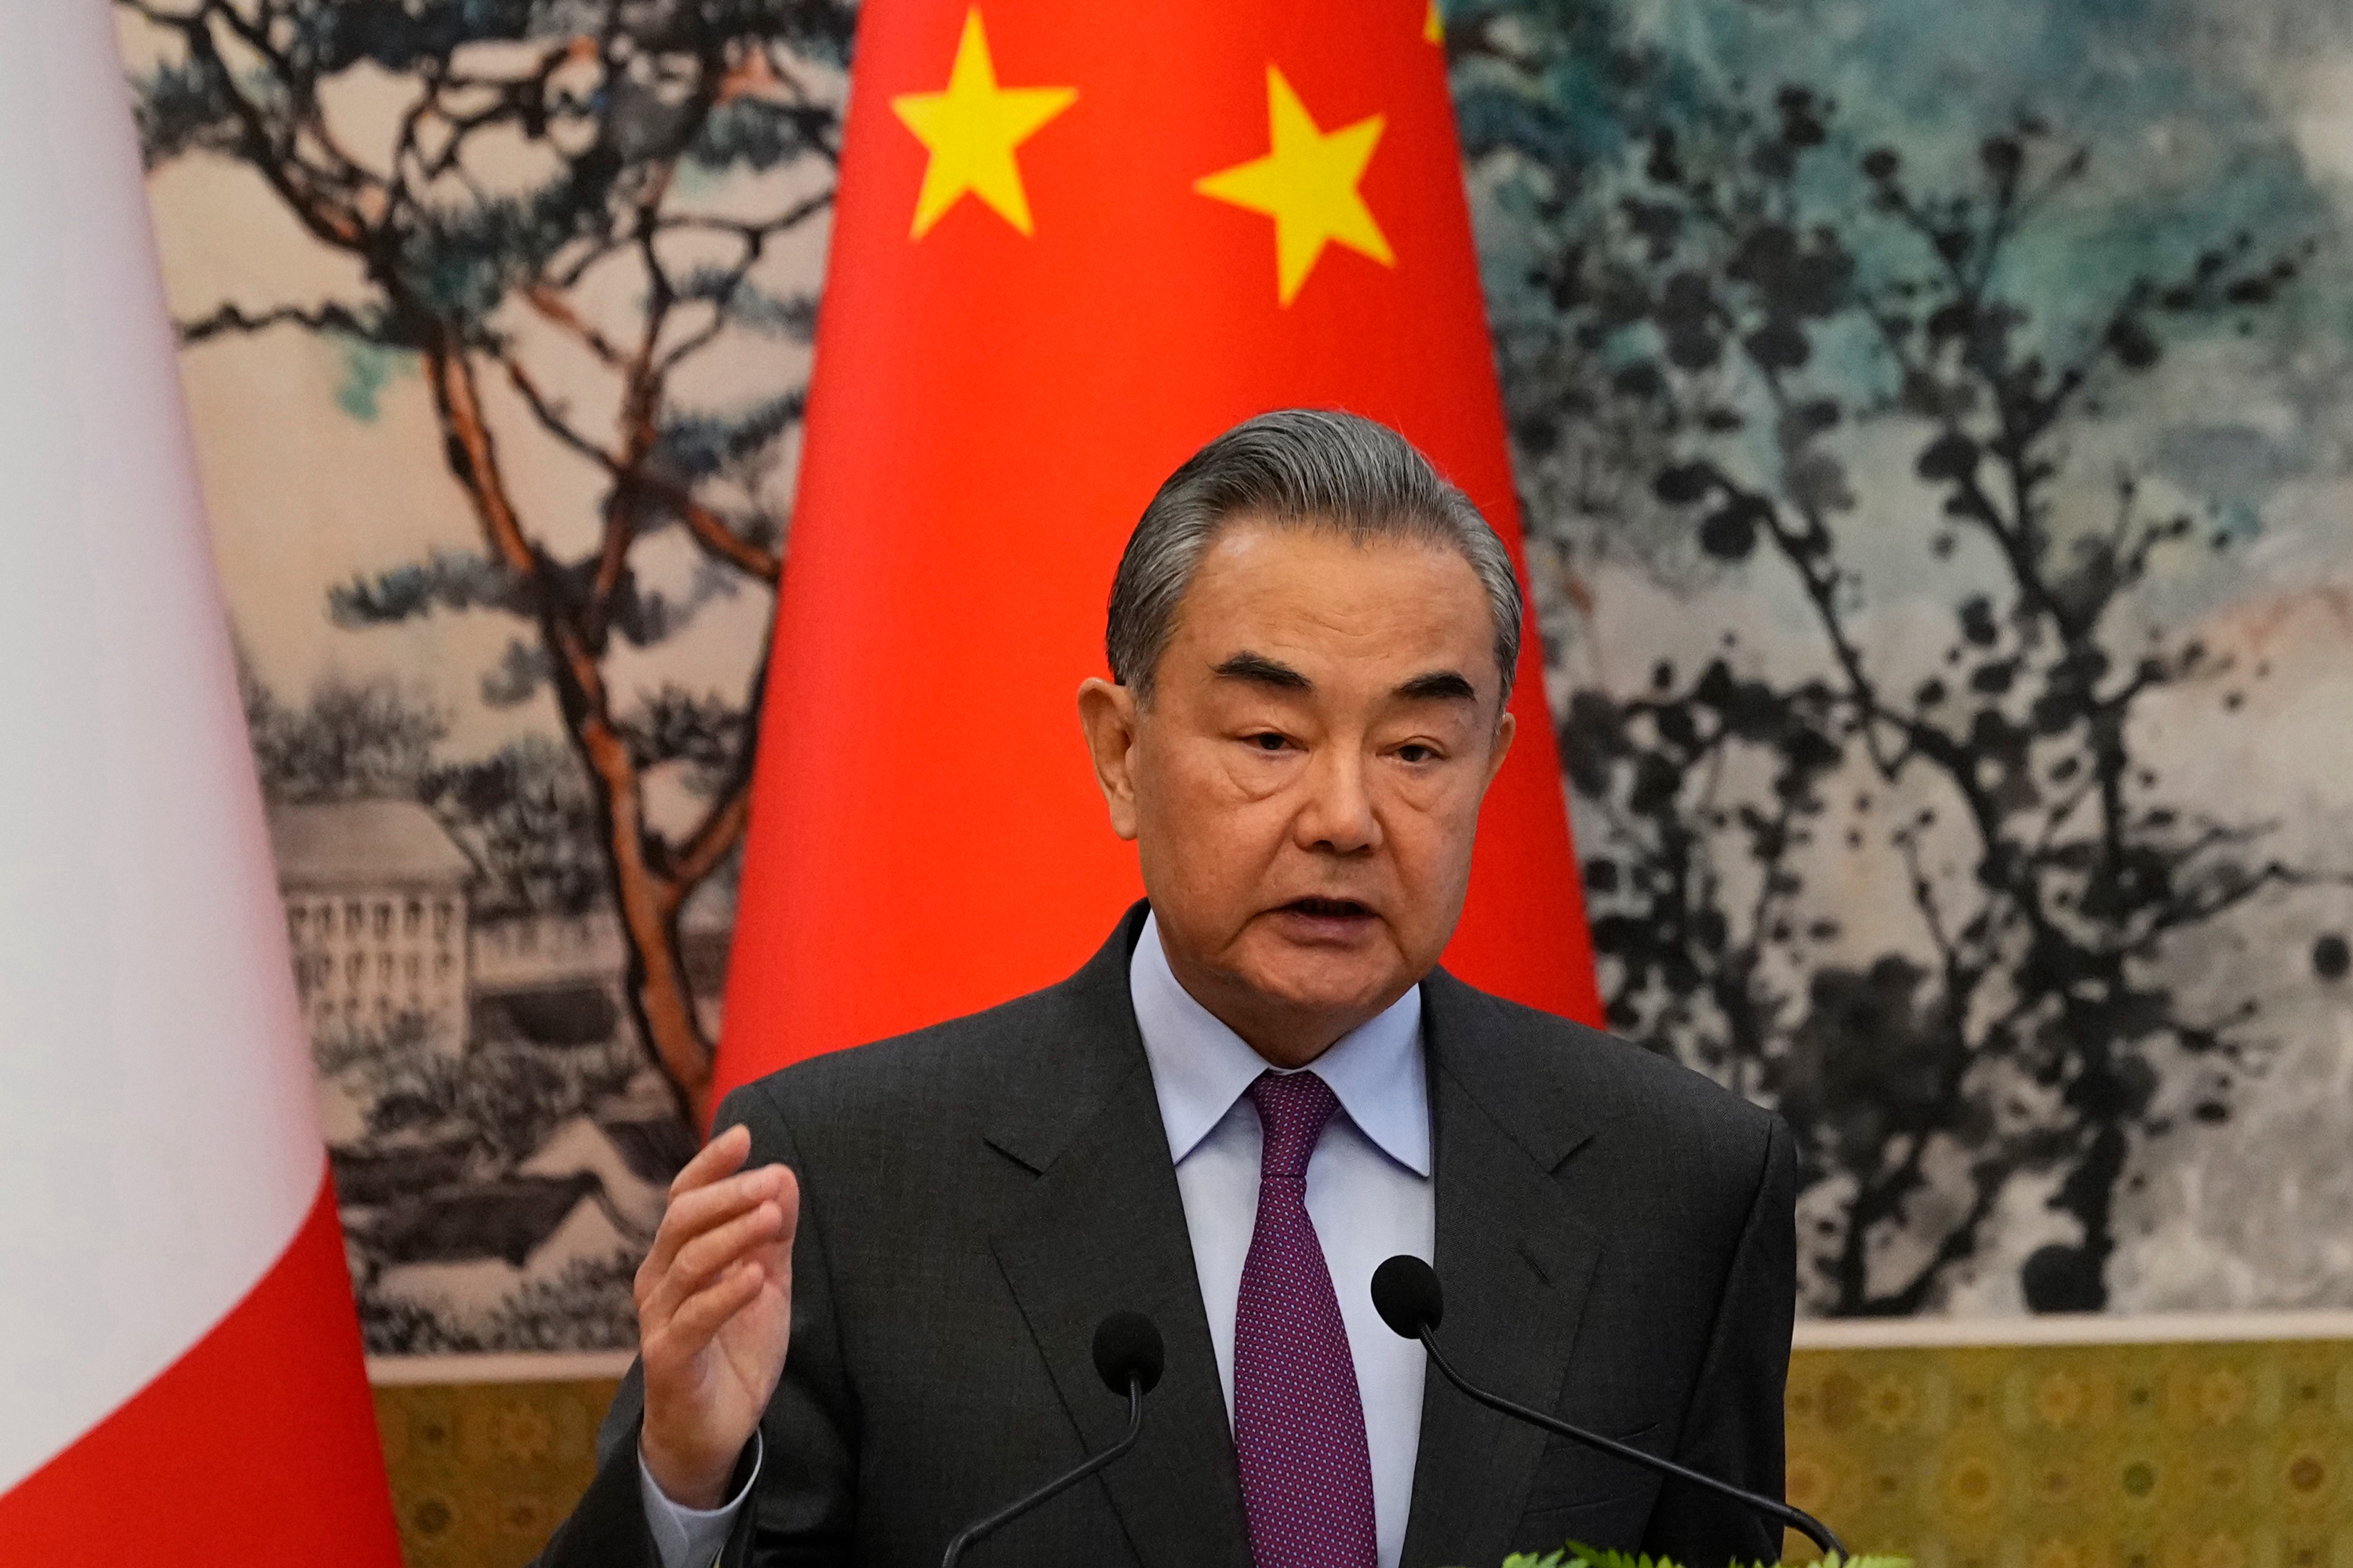 Wang Yi speaks during a press conference at Diaoyutai State Guest House in Beijing, China on April 1.